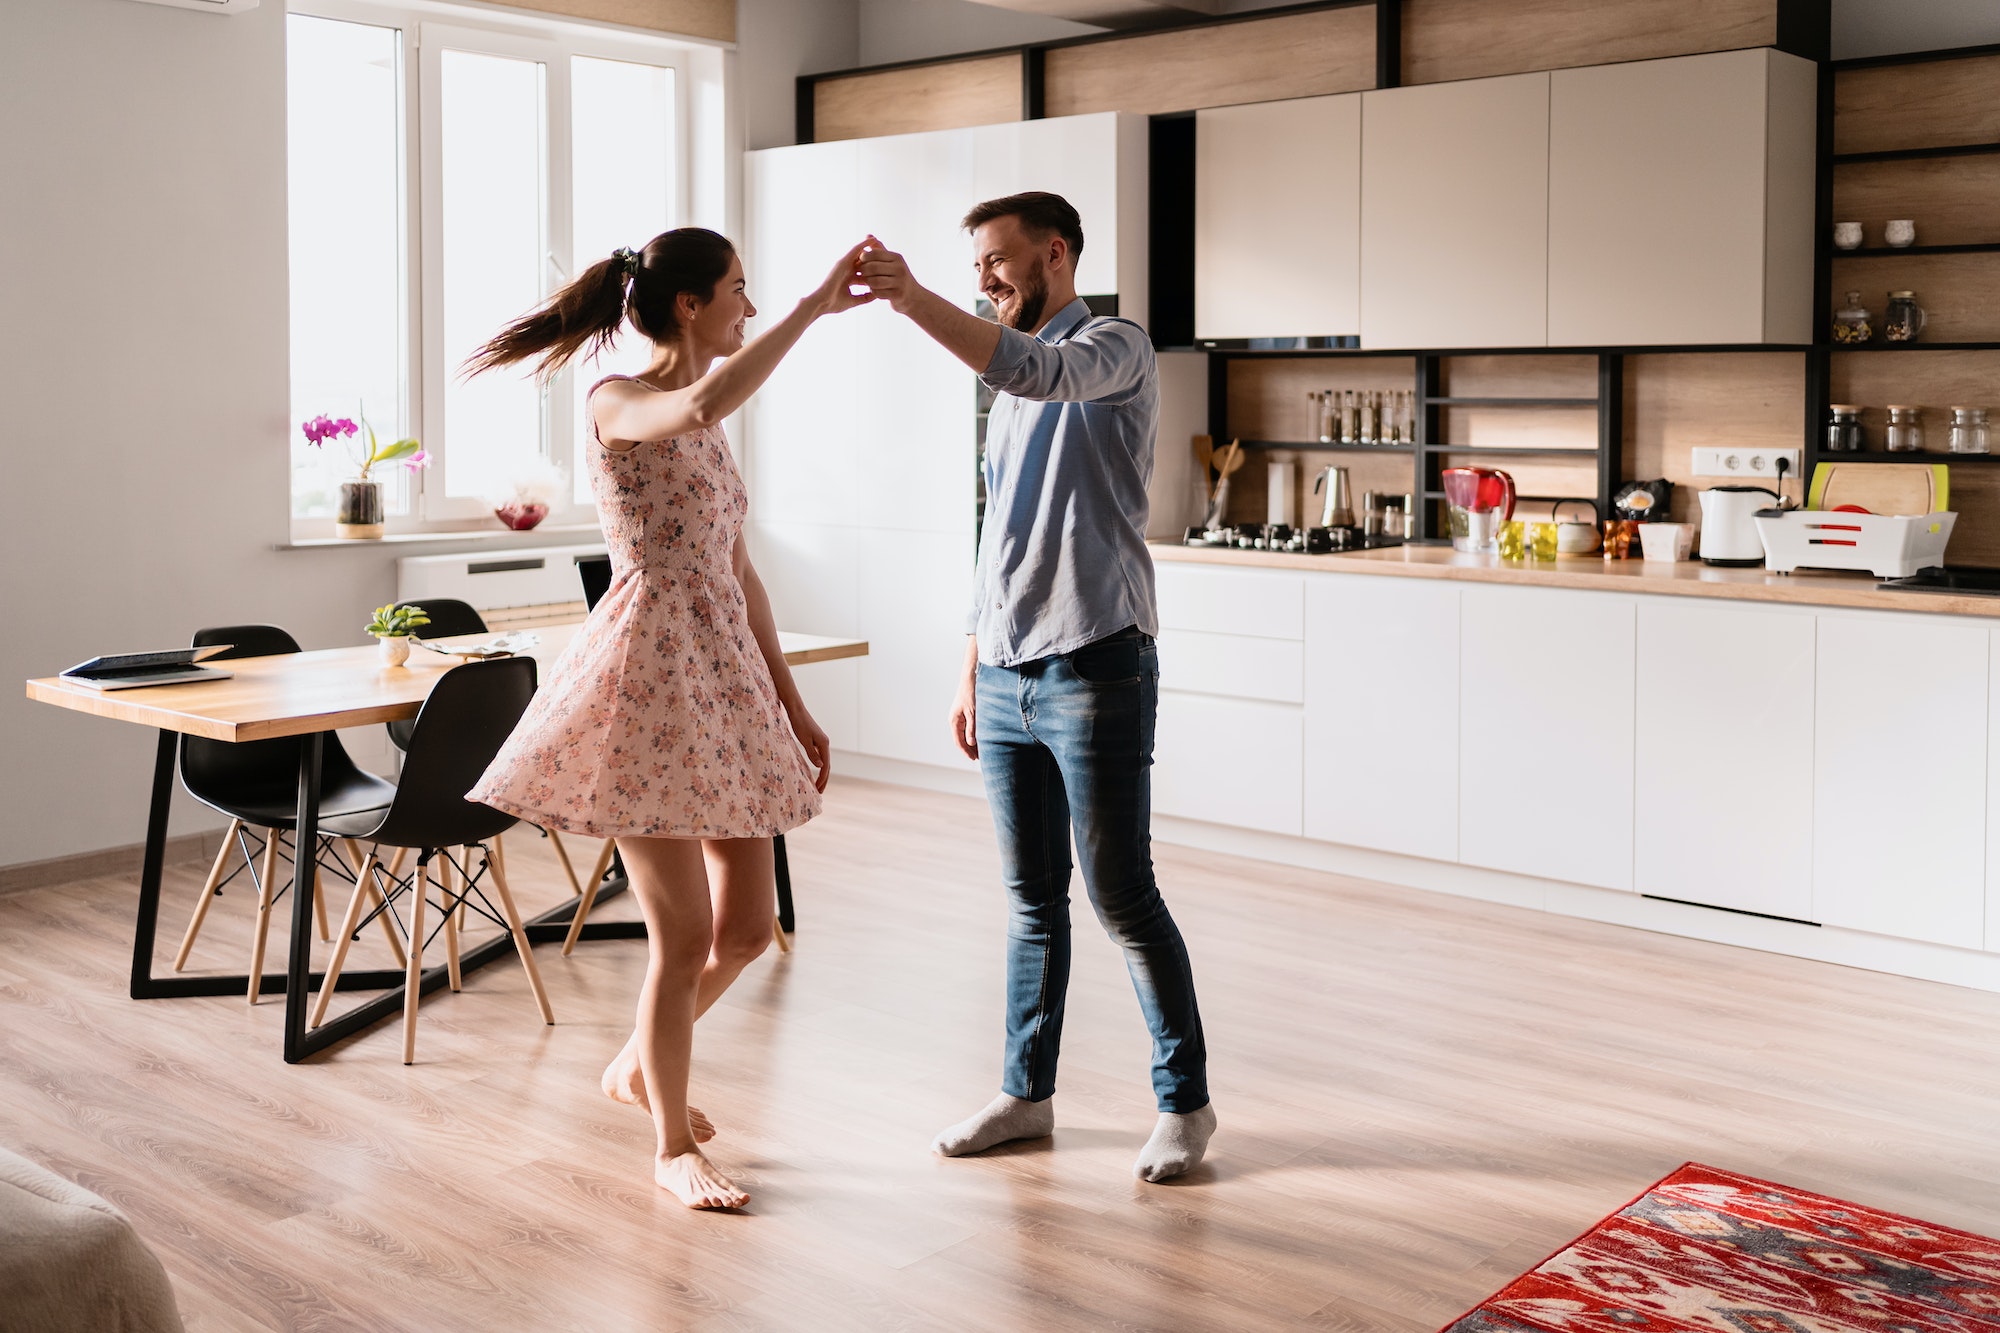 Man and woman dancing in a modern interior